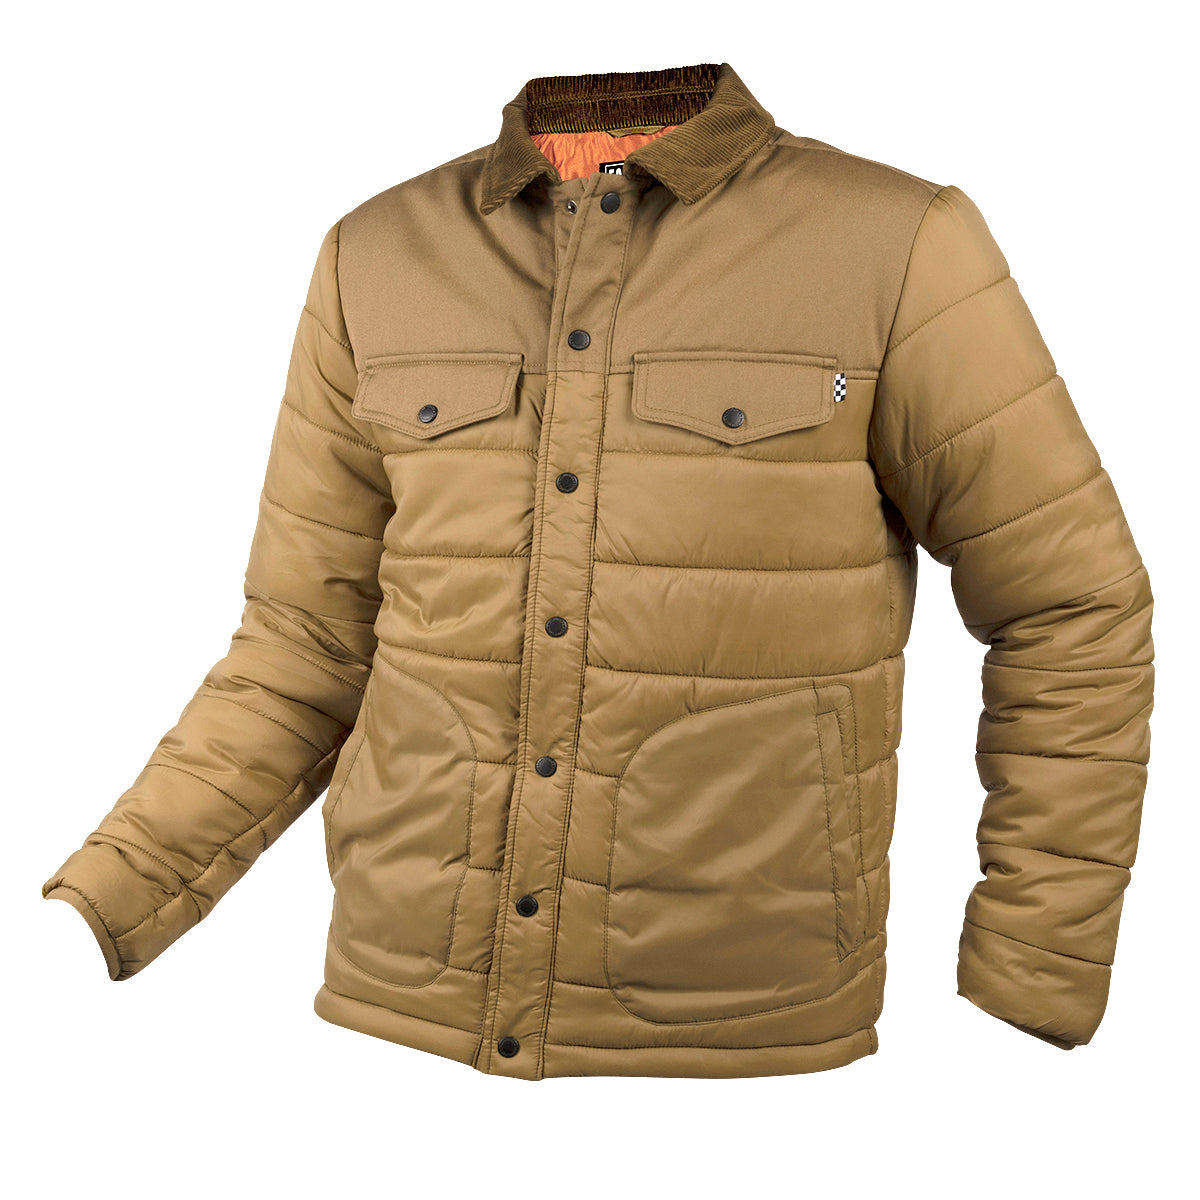 Patch Pockets Puffer Jacket with Buttons